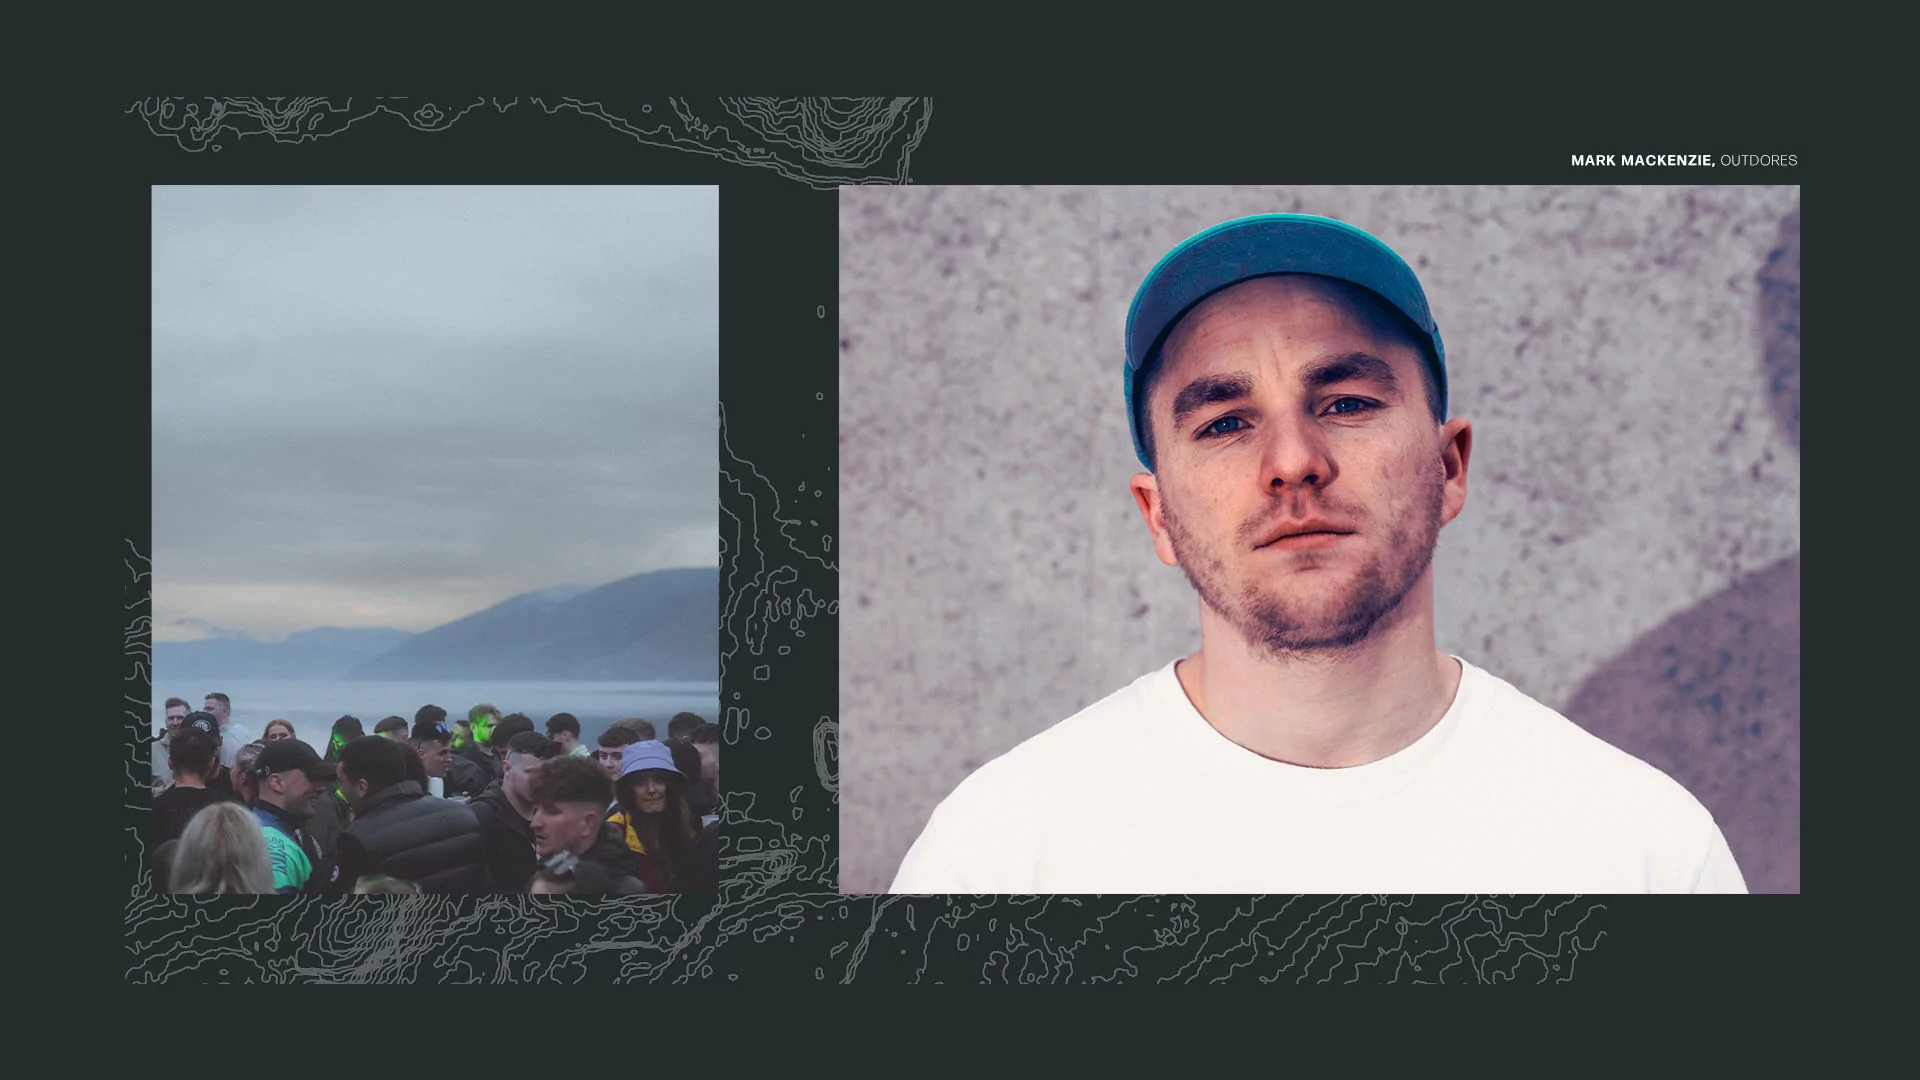 Left: A crowd shot at OutDores festival, overlooking the sea and a distant headland. Right: Mark Mackenzie